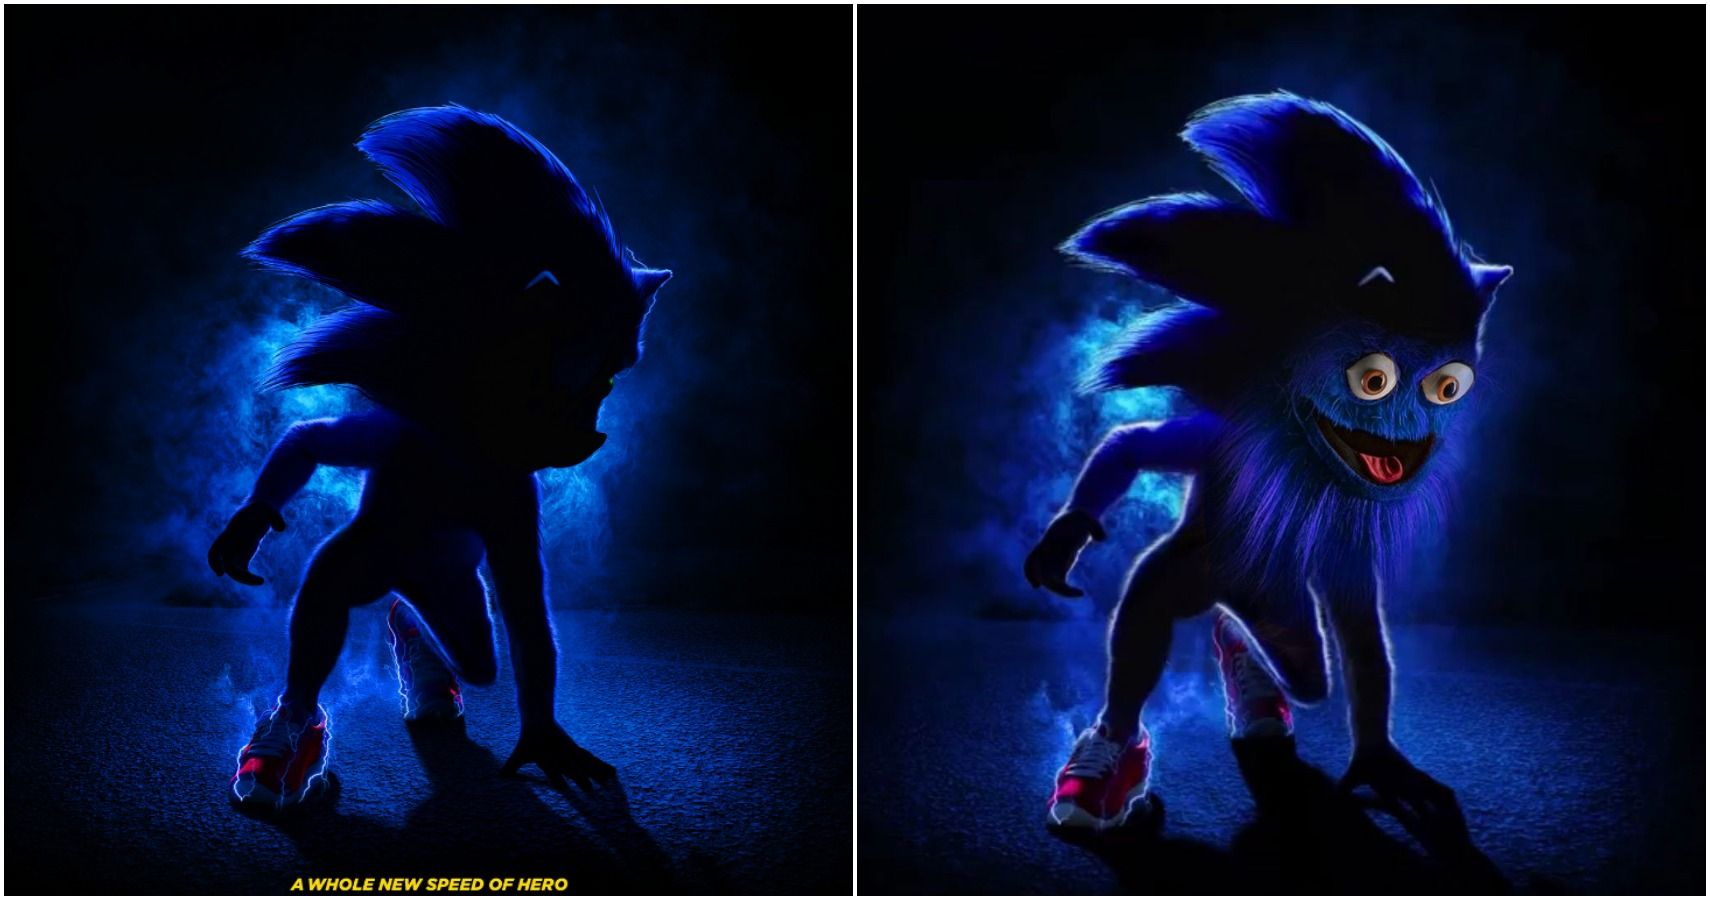 Sonic The Hedgehog Movie Poster Parodies Are Terrifying (Here Are Our Favorites)